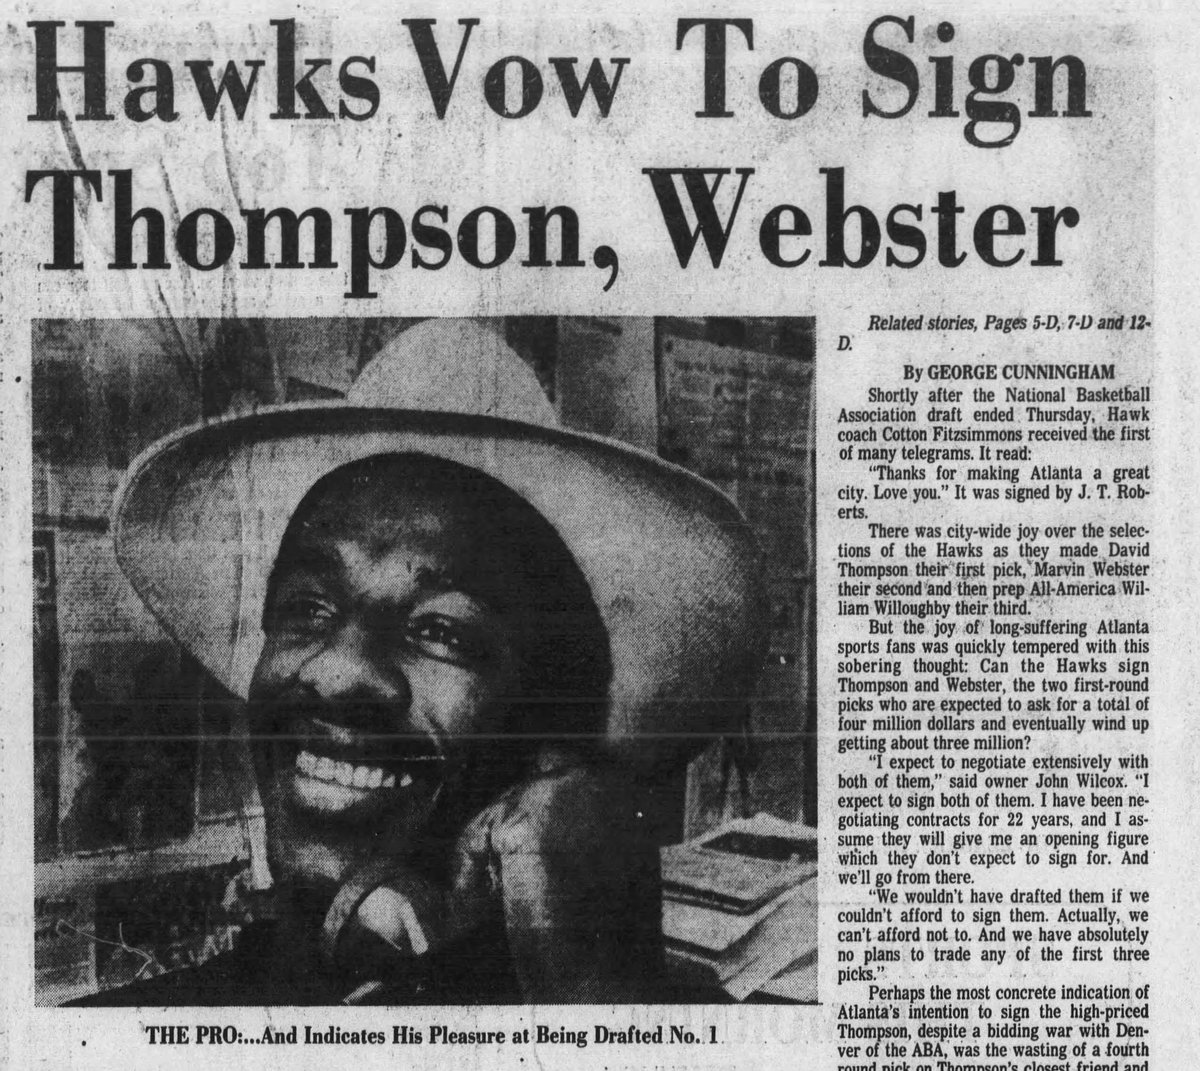 Last time Atlanta Hawks drafted with the first pick, it was 1975 🥸

Note that David Thompson never played for the Hawks.